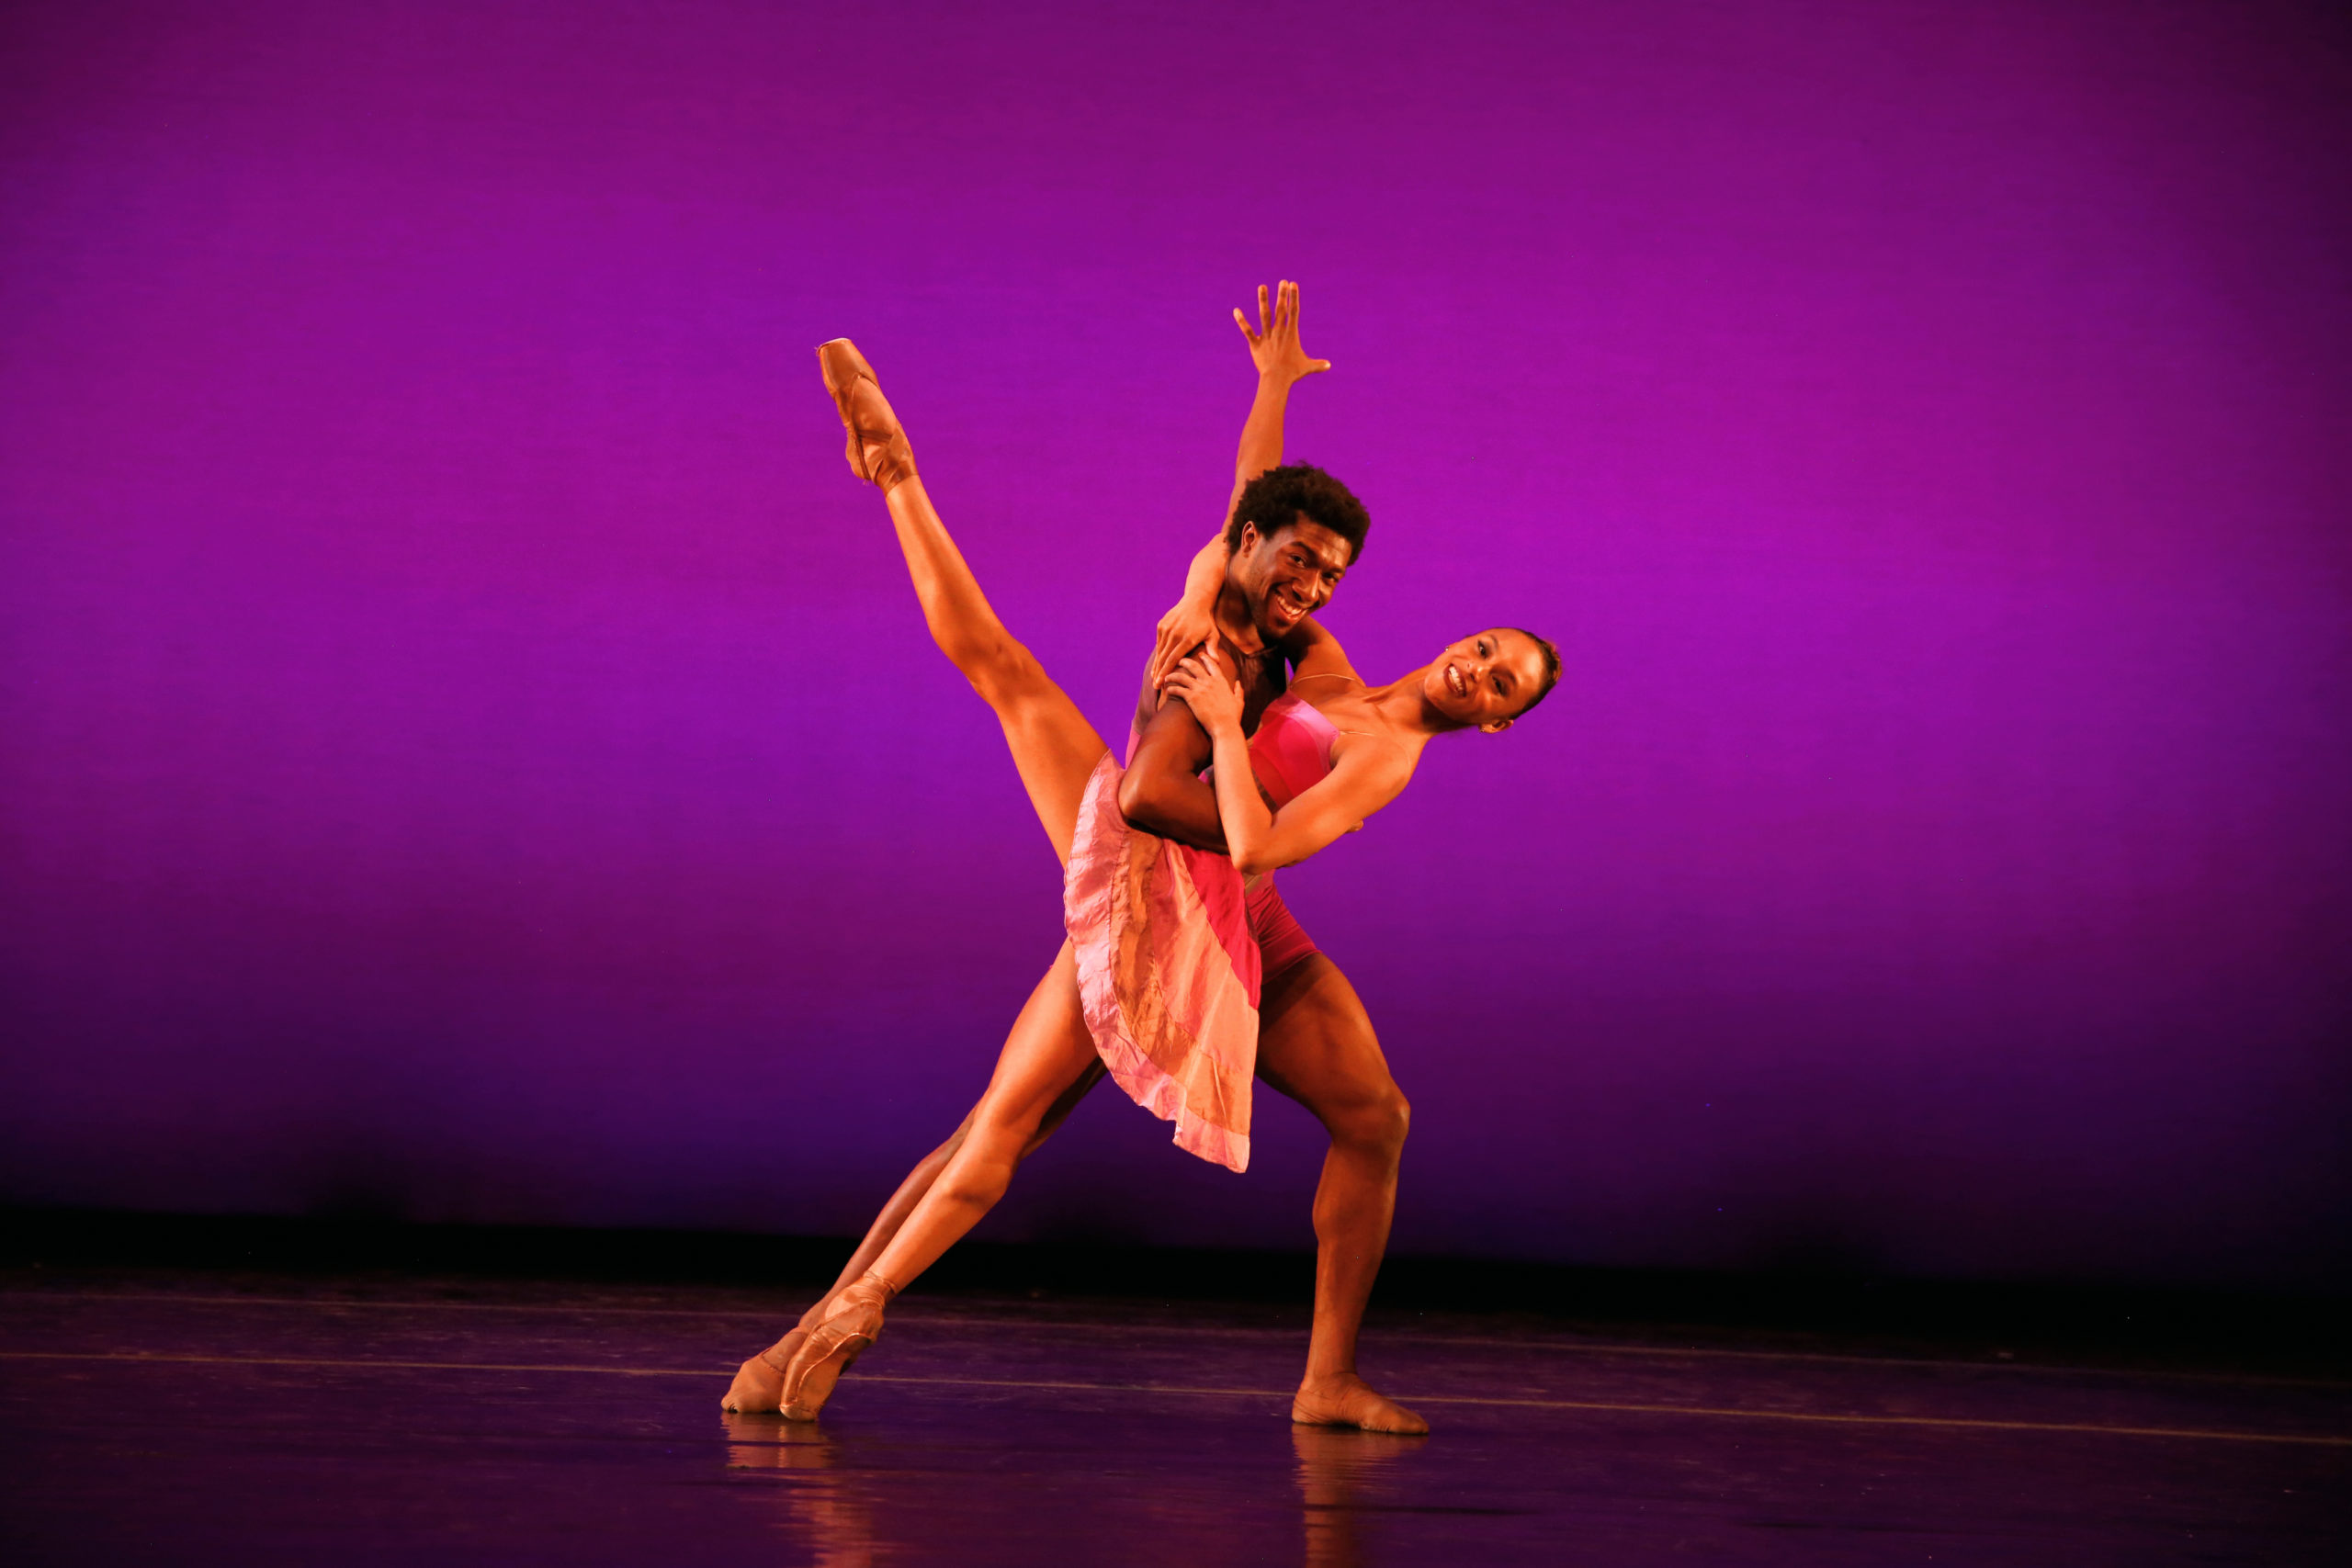 Amanda Smith, in a pink dance dress, leans back into a développé devant while wrapping her arms around Da'Von Doane's shoulders. He holds her around the waist and lunges on his left leg. Both dancers look towards the audience and smile brightly.